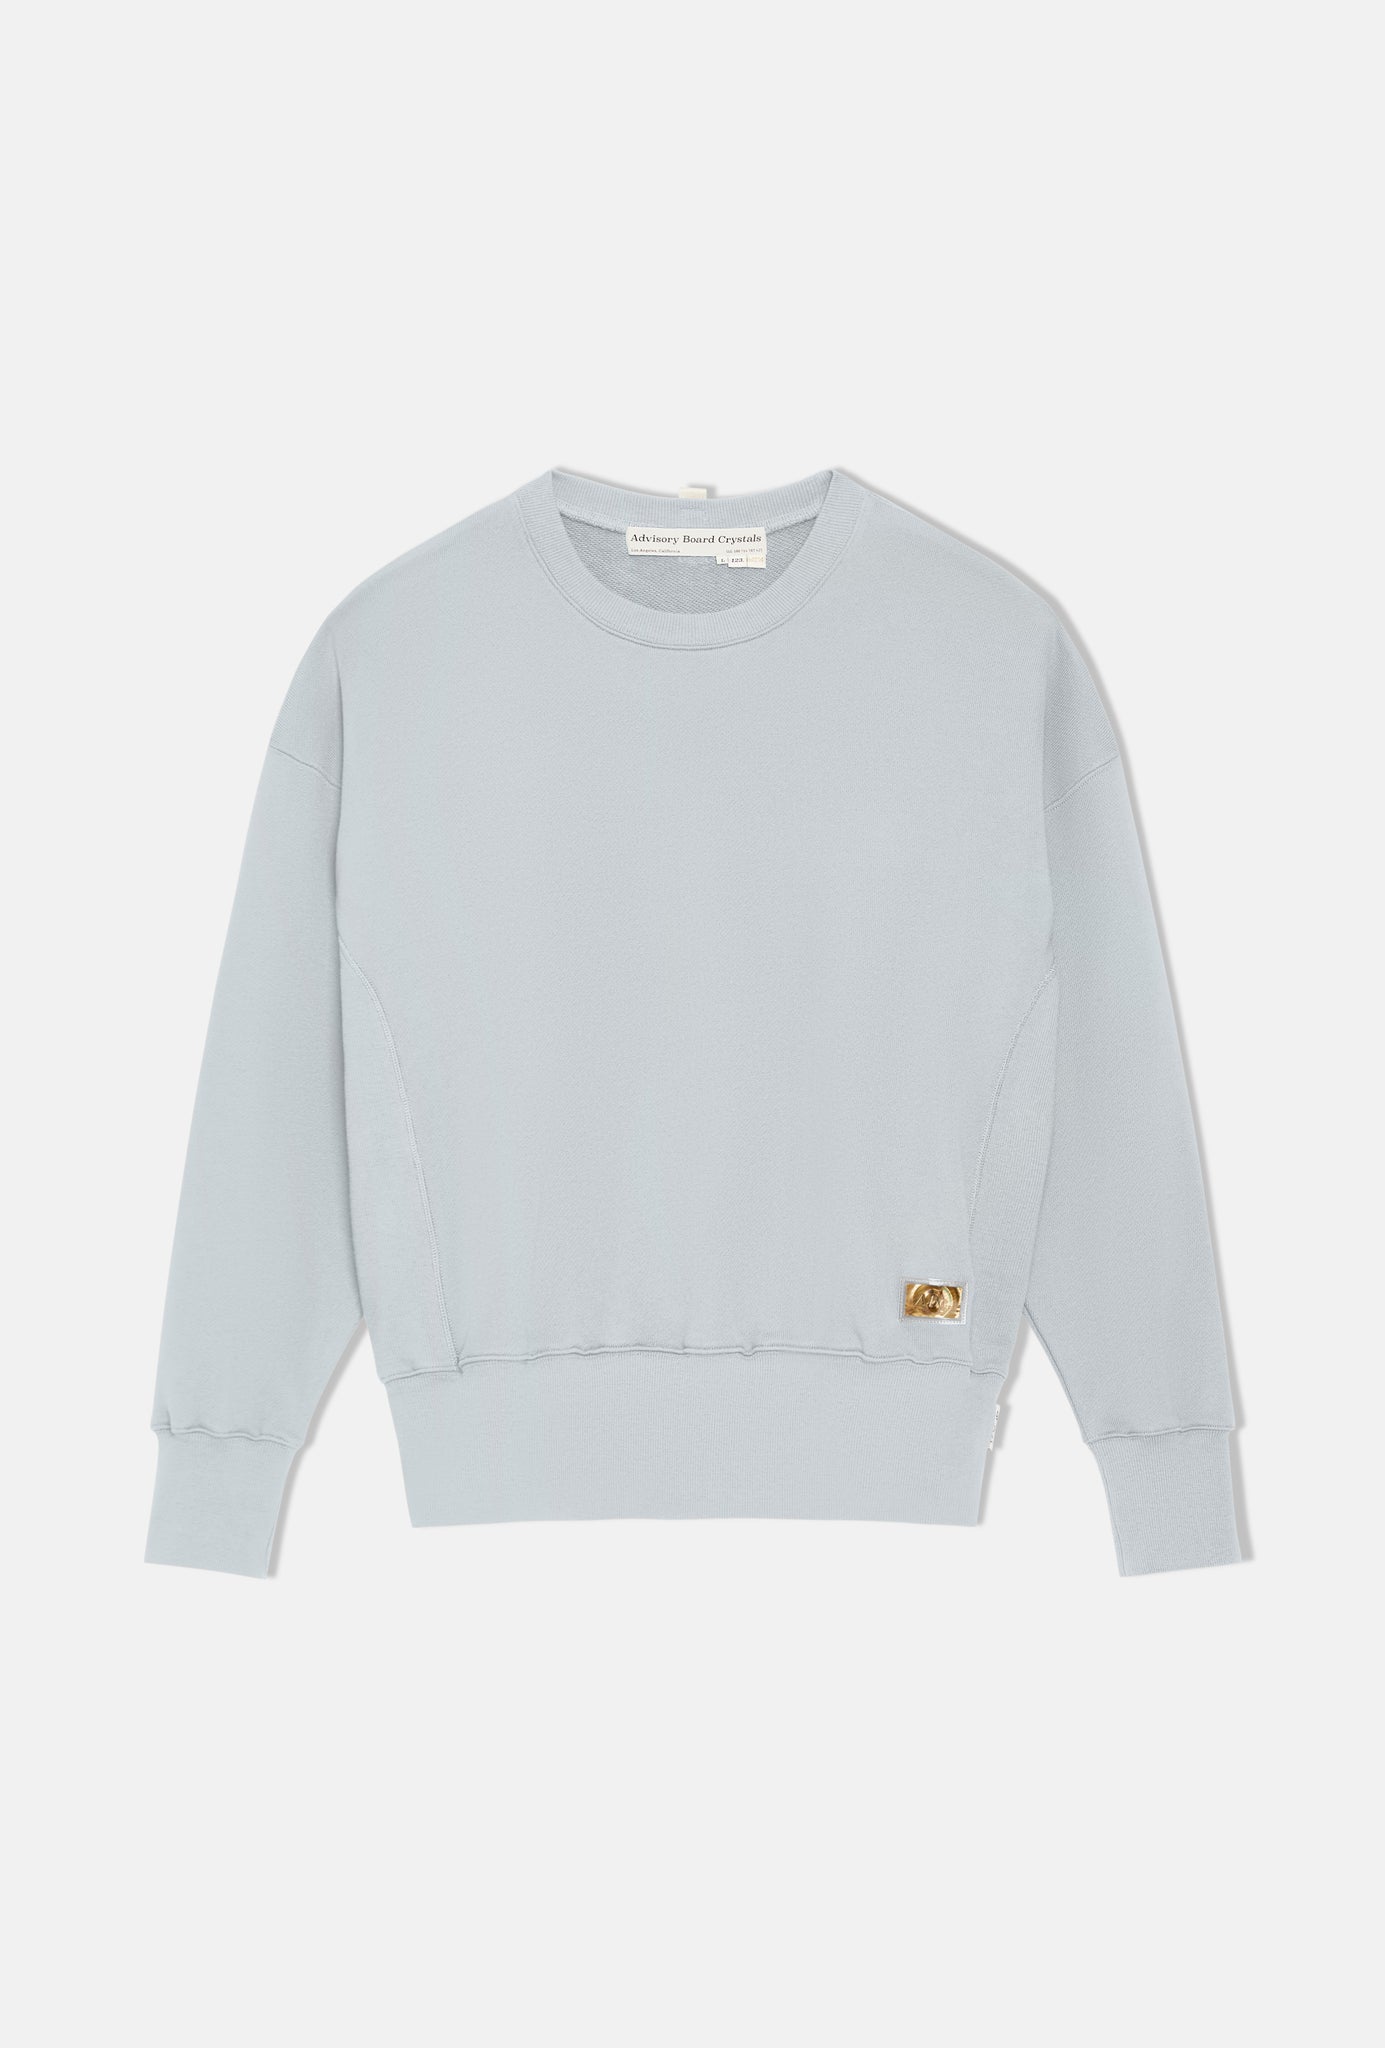 Abc. 123 Hologram French Terry Crewneck (SS24)- Blue